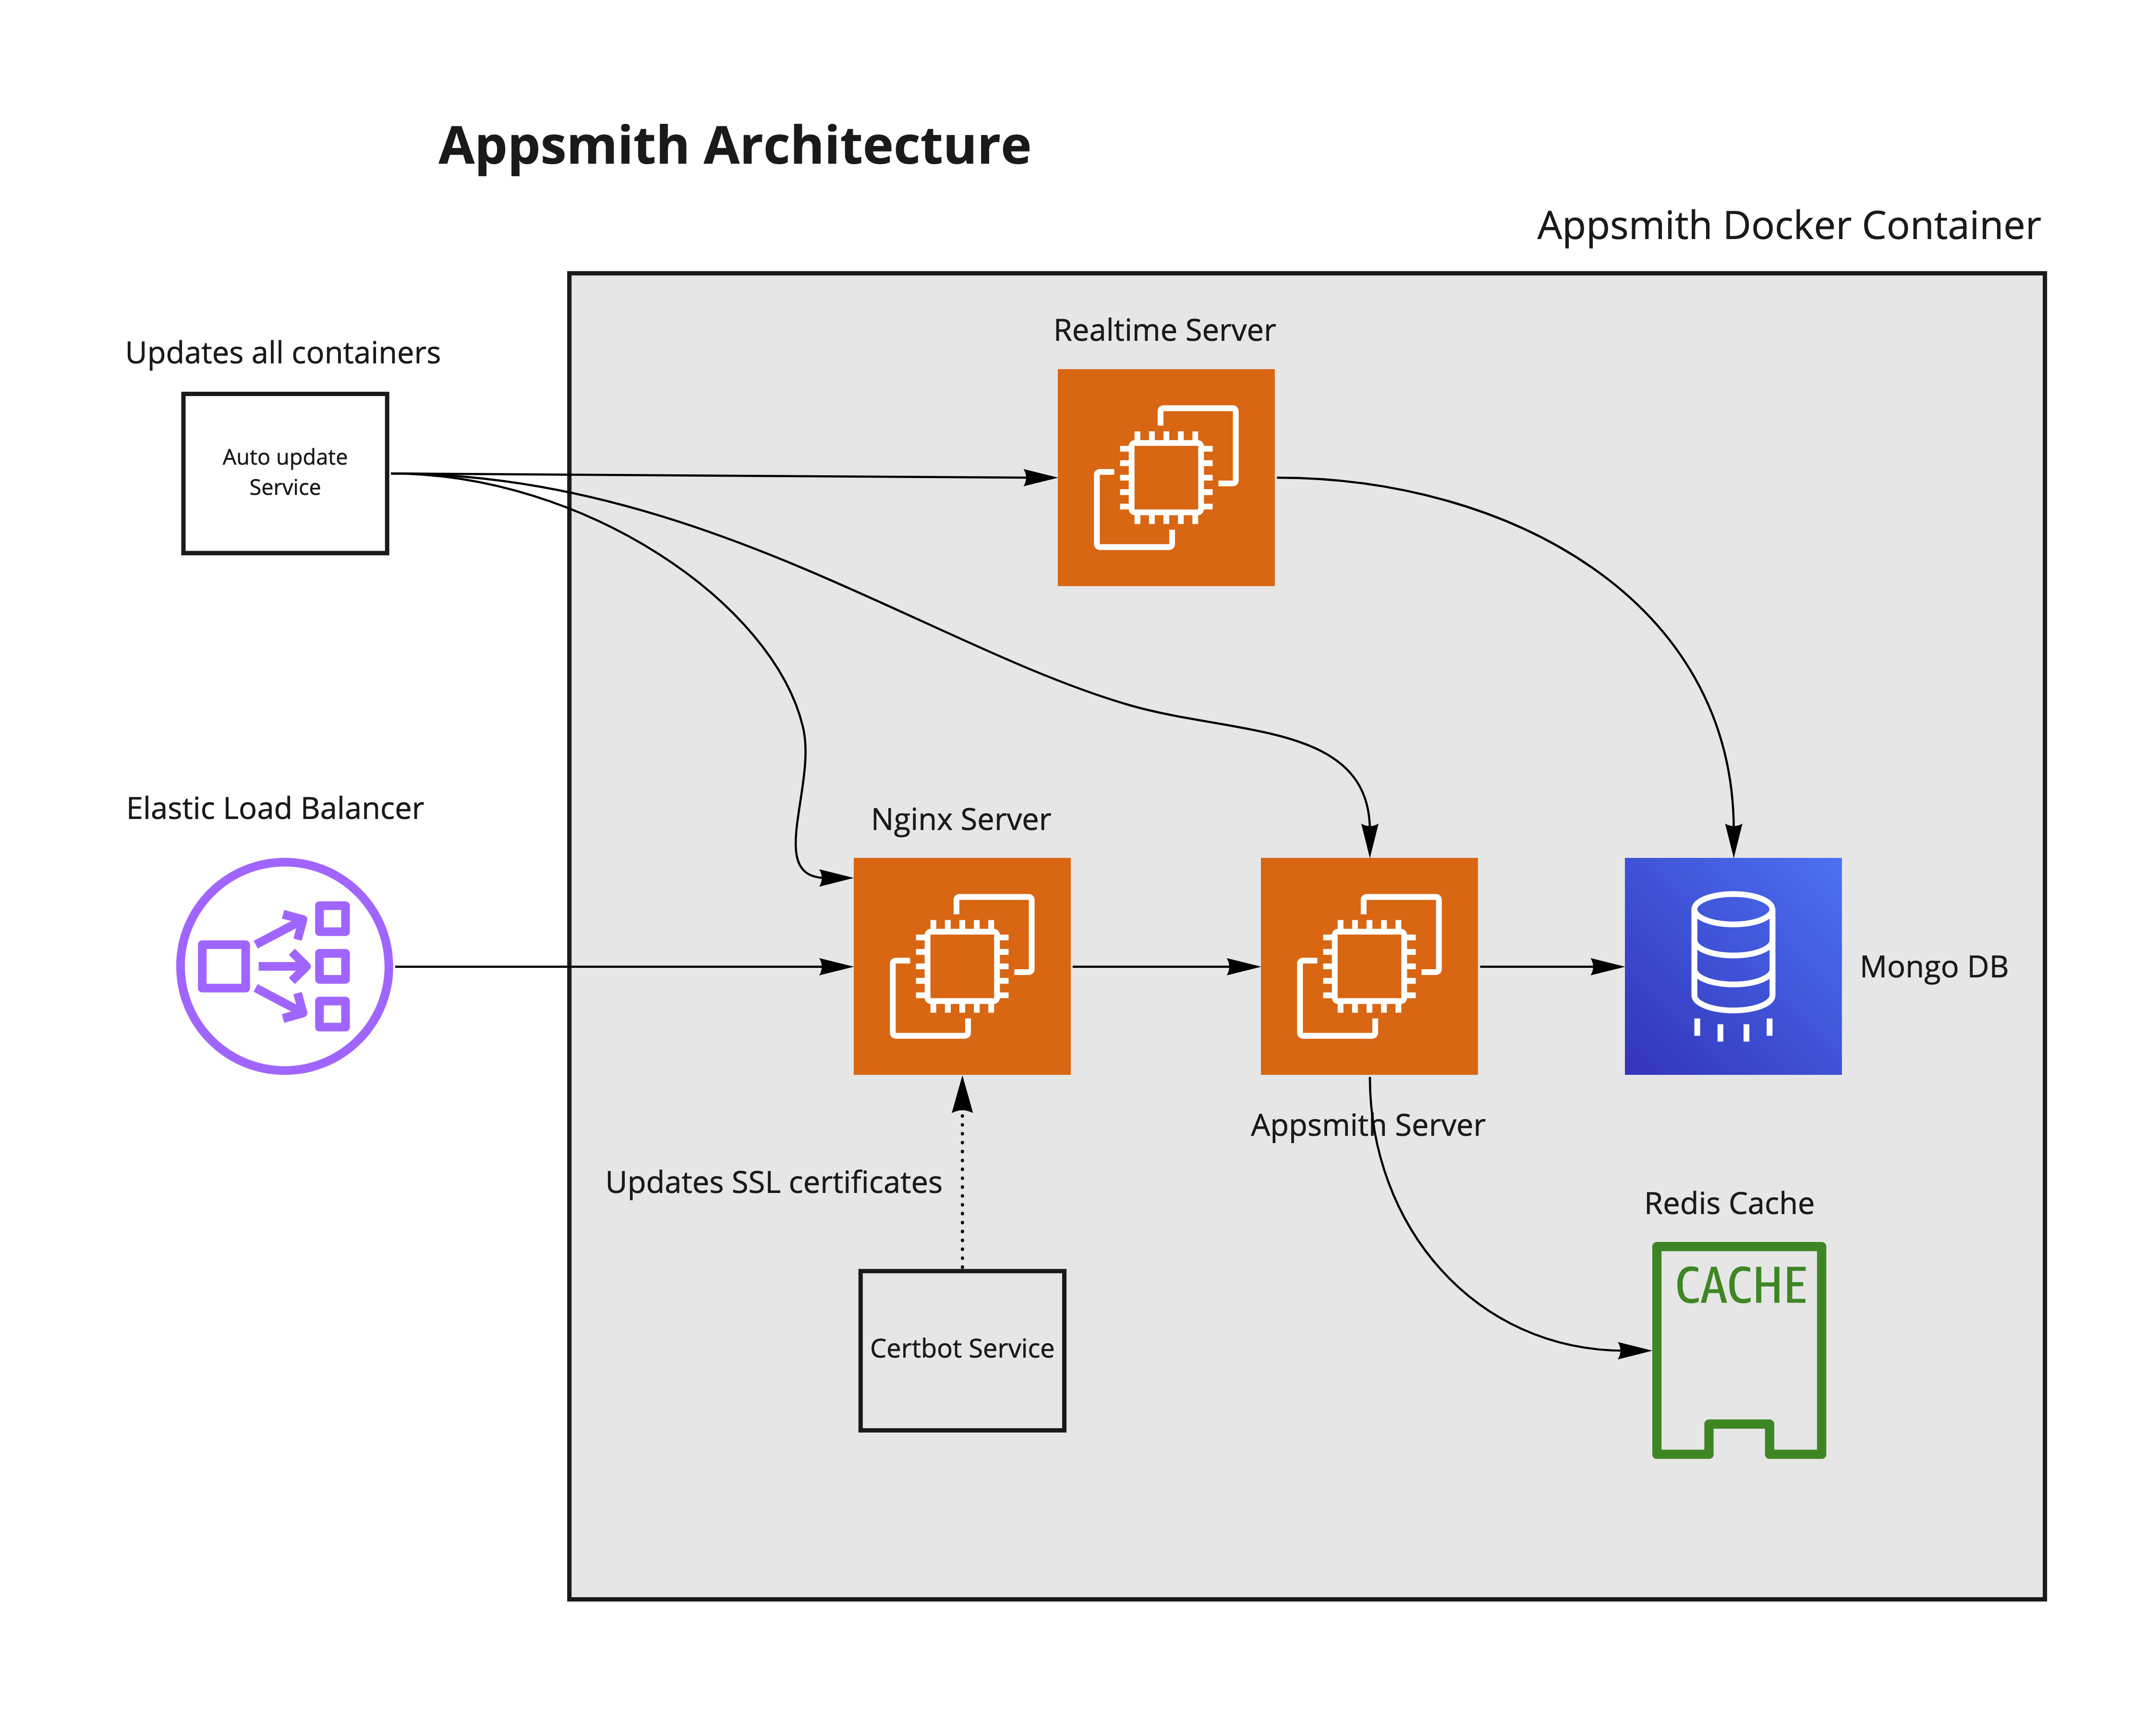 Diagram showing the Appsmith Architecture in Details